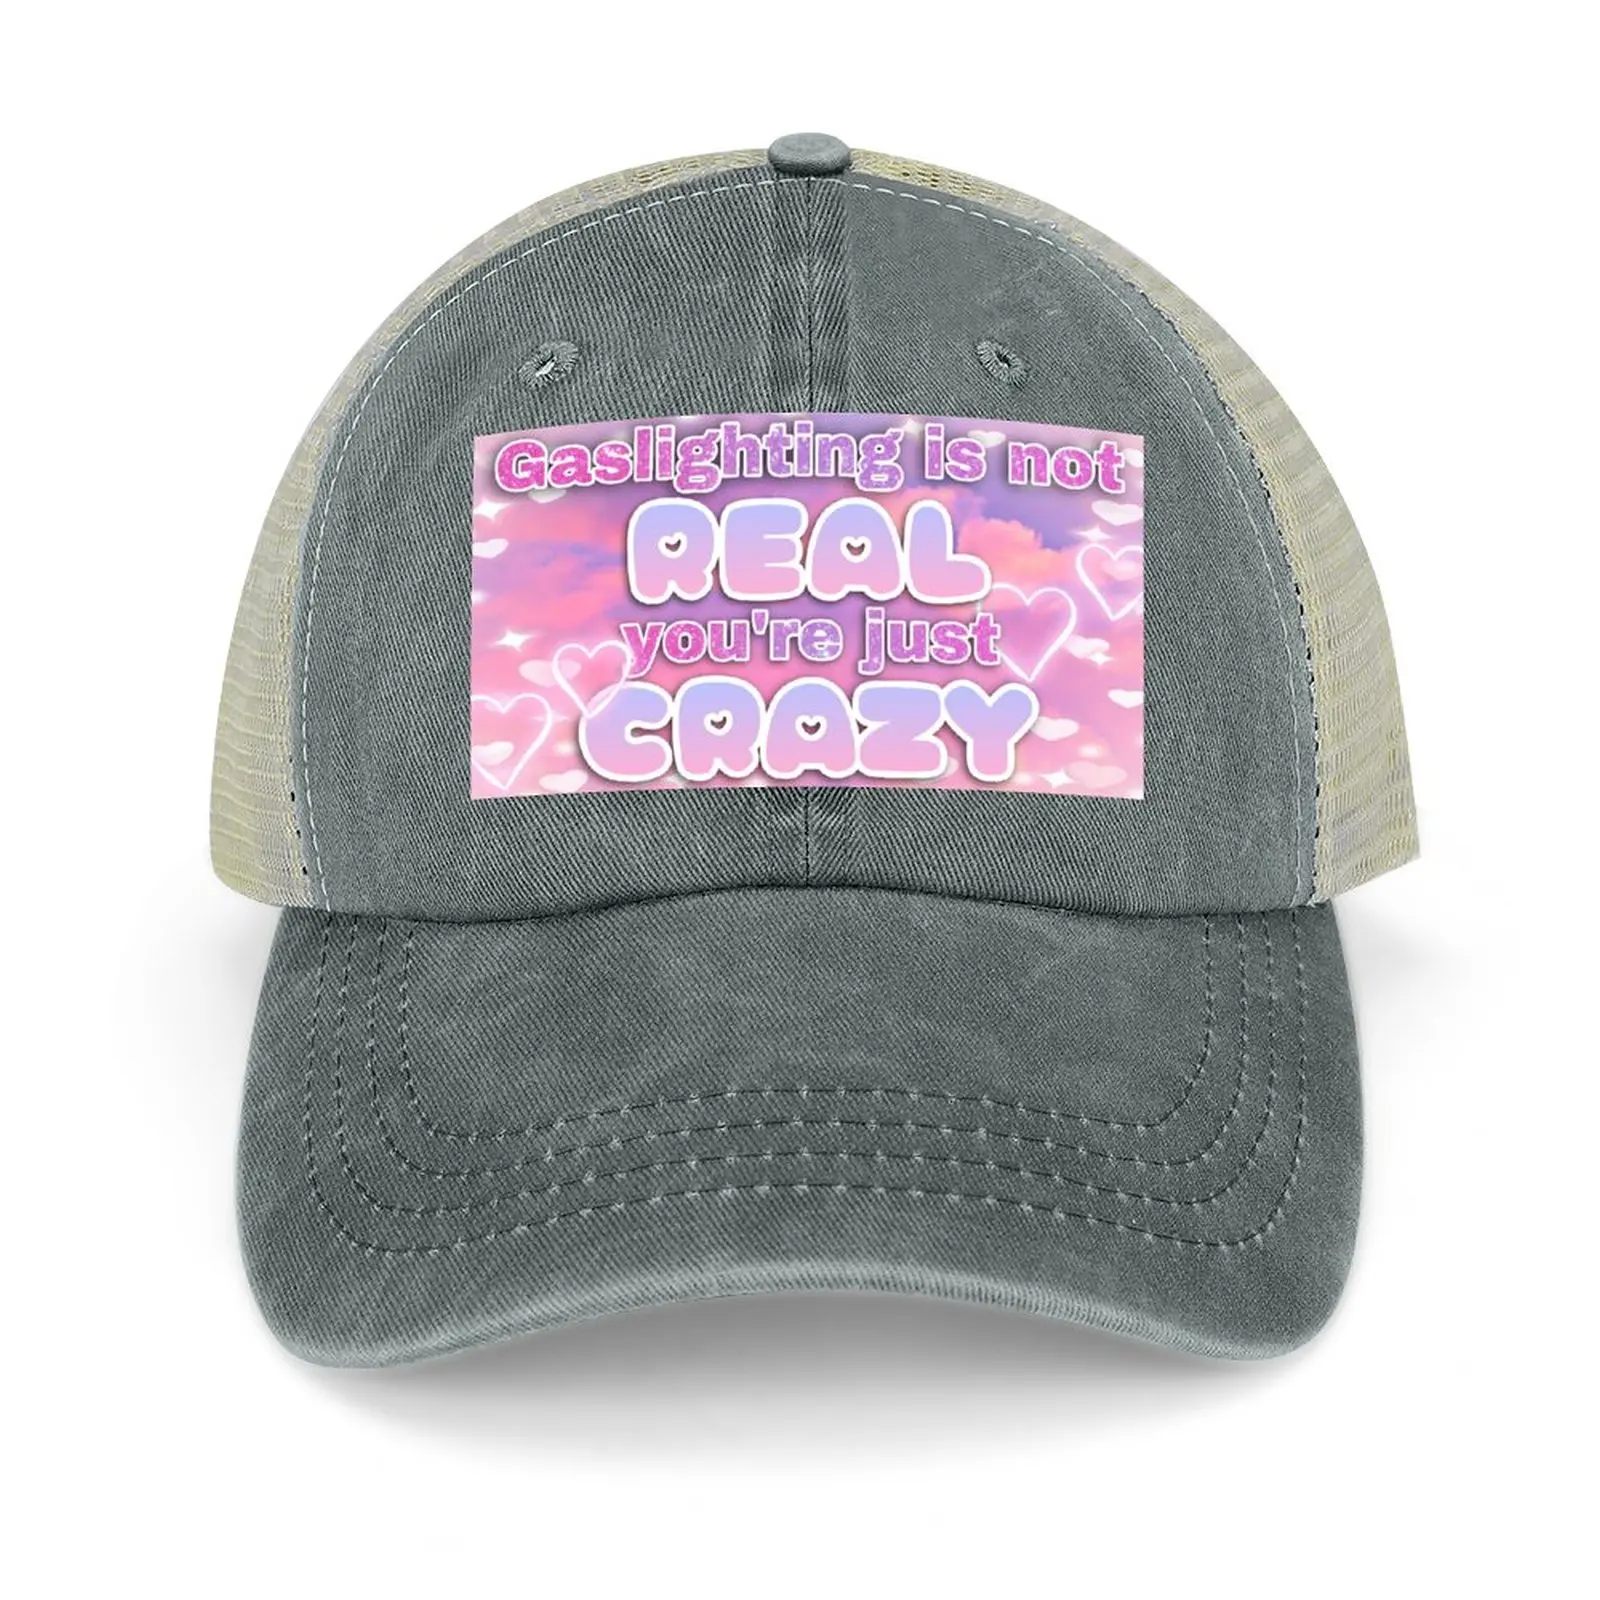 

Gaslighting is not REAL youre just CRAZY Cowboy Hat Golf Hat fashionable cute Snap Back Hat Cap Woman Men'S